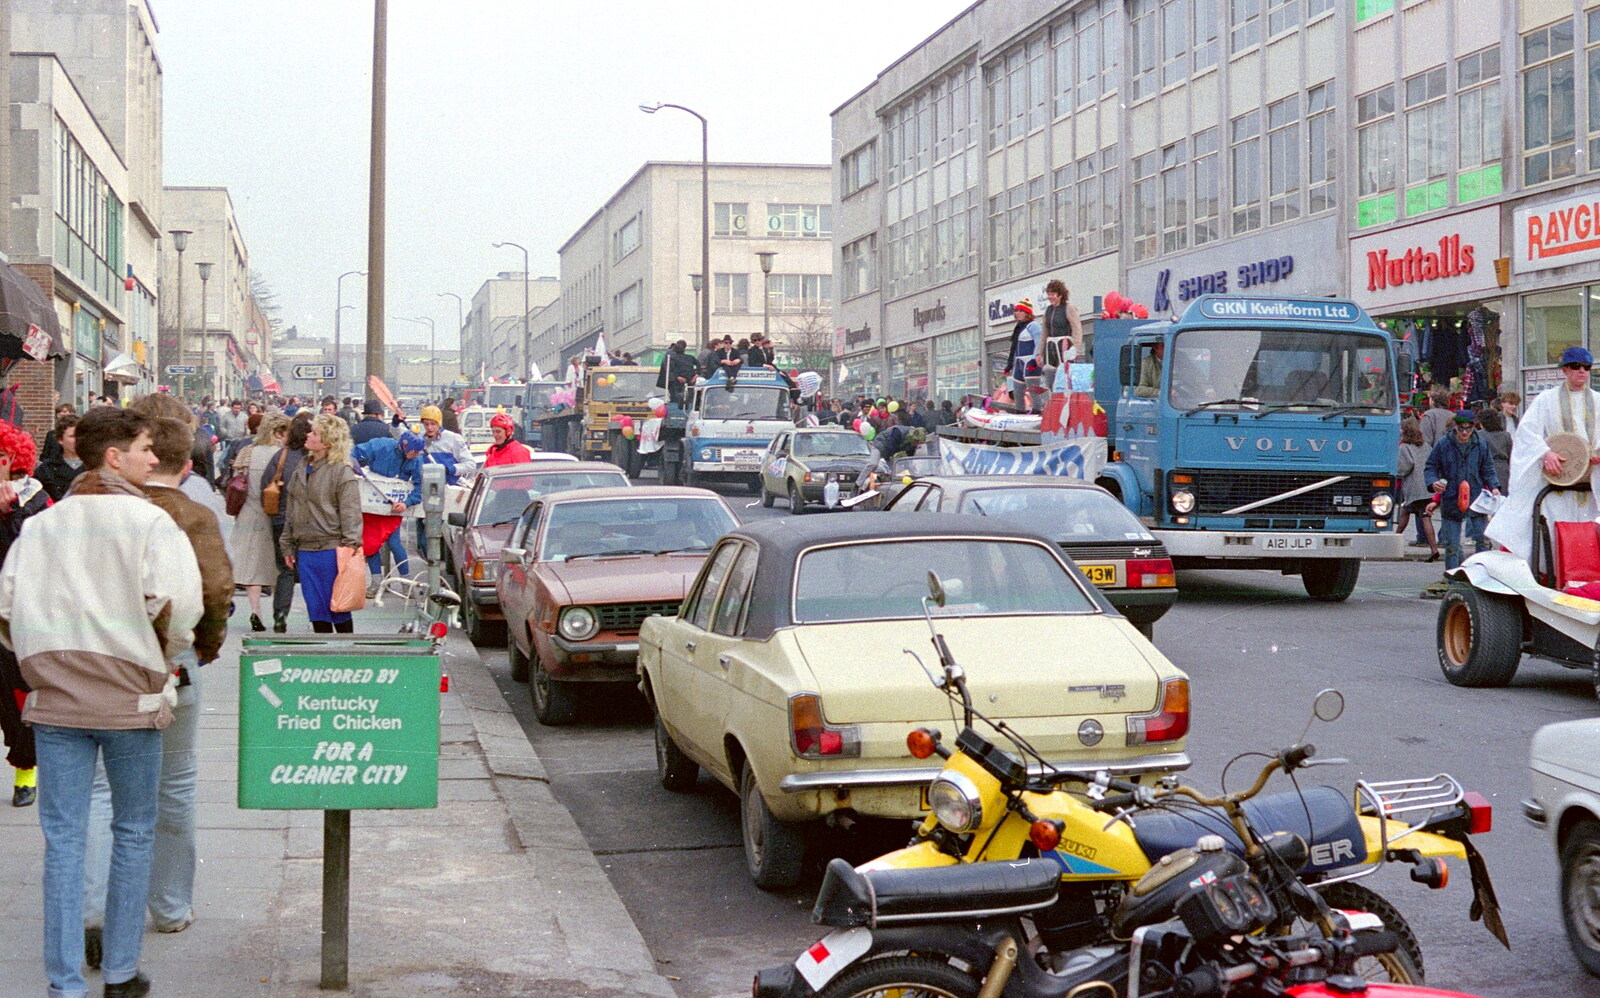 The procession and loads of 80s cars on New George Street from Uni: PPSU "Jazz" RAG Street Parade, Plymouth, Devon - 17th February 1986